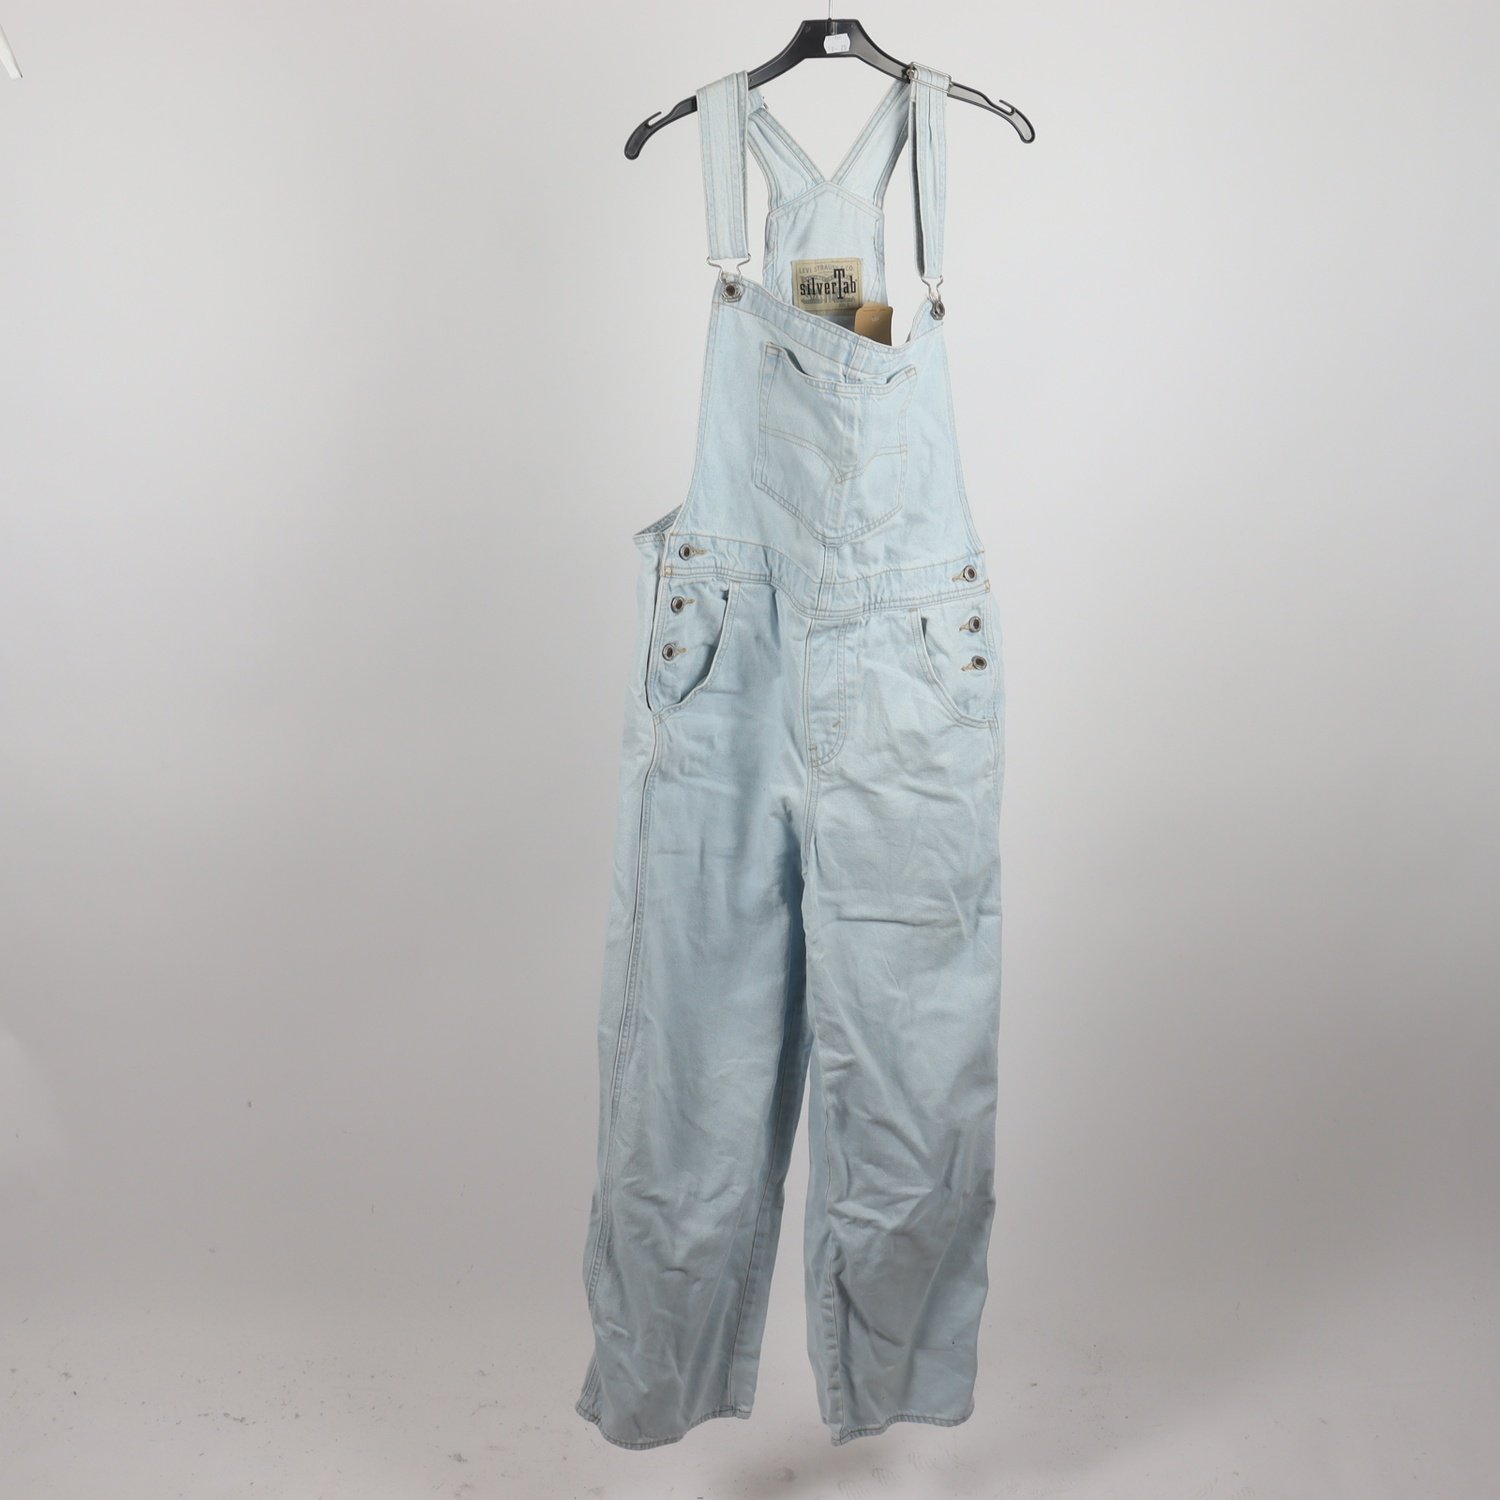 Hängslejeans Overall, Levi’s Silver Tab, stl. L